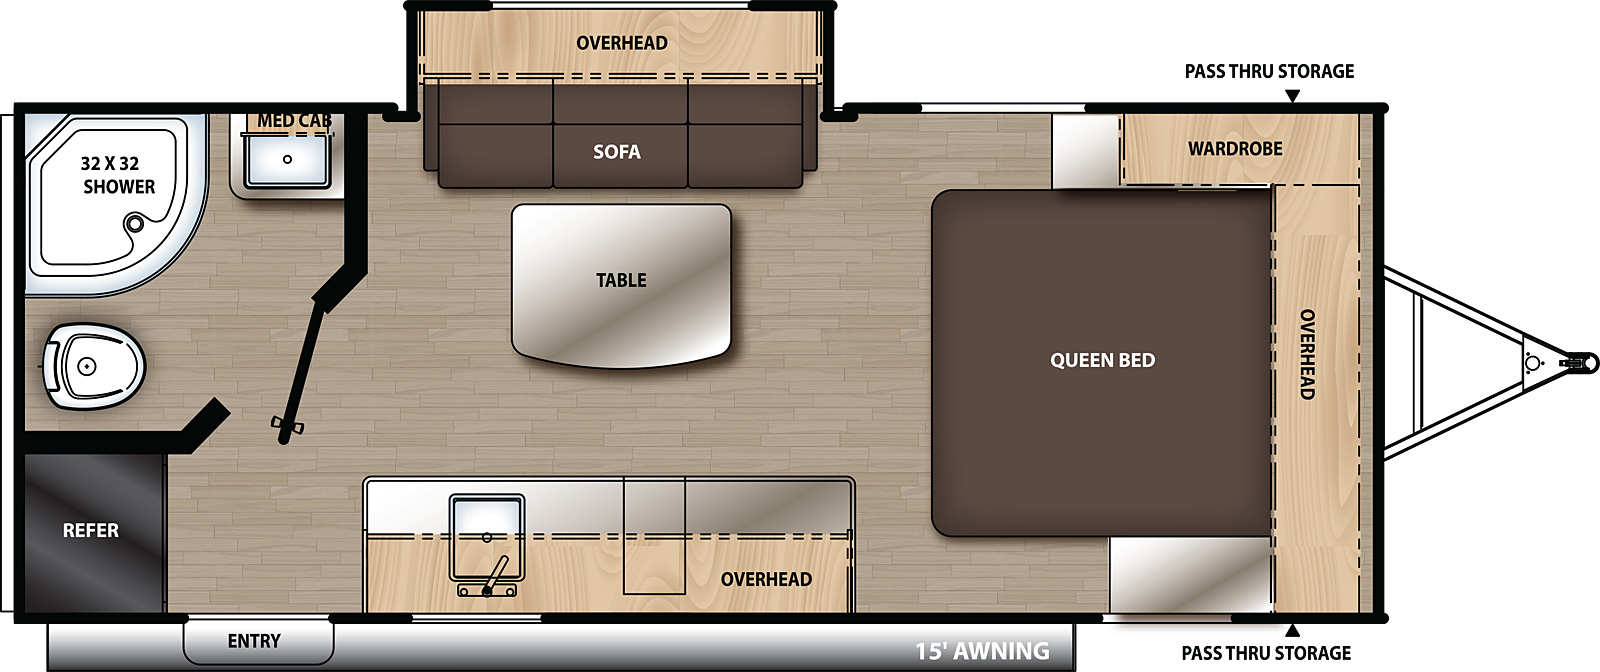 The 184FQS has one slide out on the off-door side and one entry door on the door side. Interior layout from front to back: front facing queen bed with cabinets overhead and wardrobe on off-door side; Kitchen living dining area with slide out on the off-door side containing sofa with cabinets overhead; Freestanding table in the center; door side with overhead cabinets, single bowl sink, and refrigerator located on the door side rear; Rear off-door side corner bathroom. 